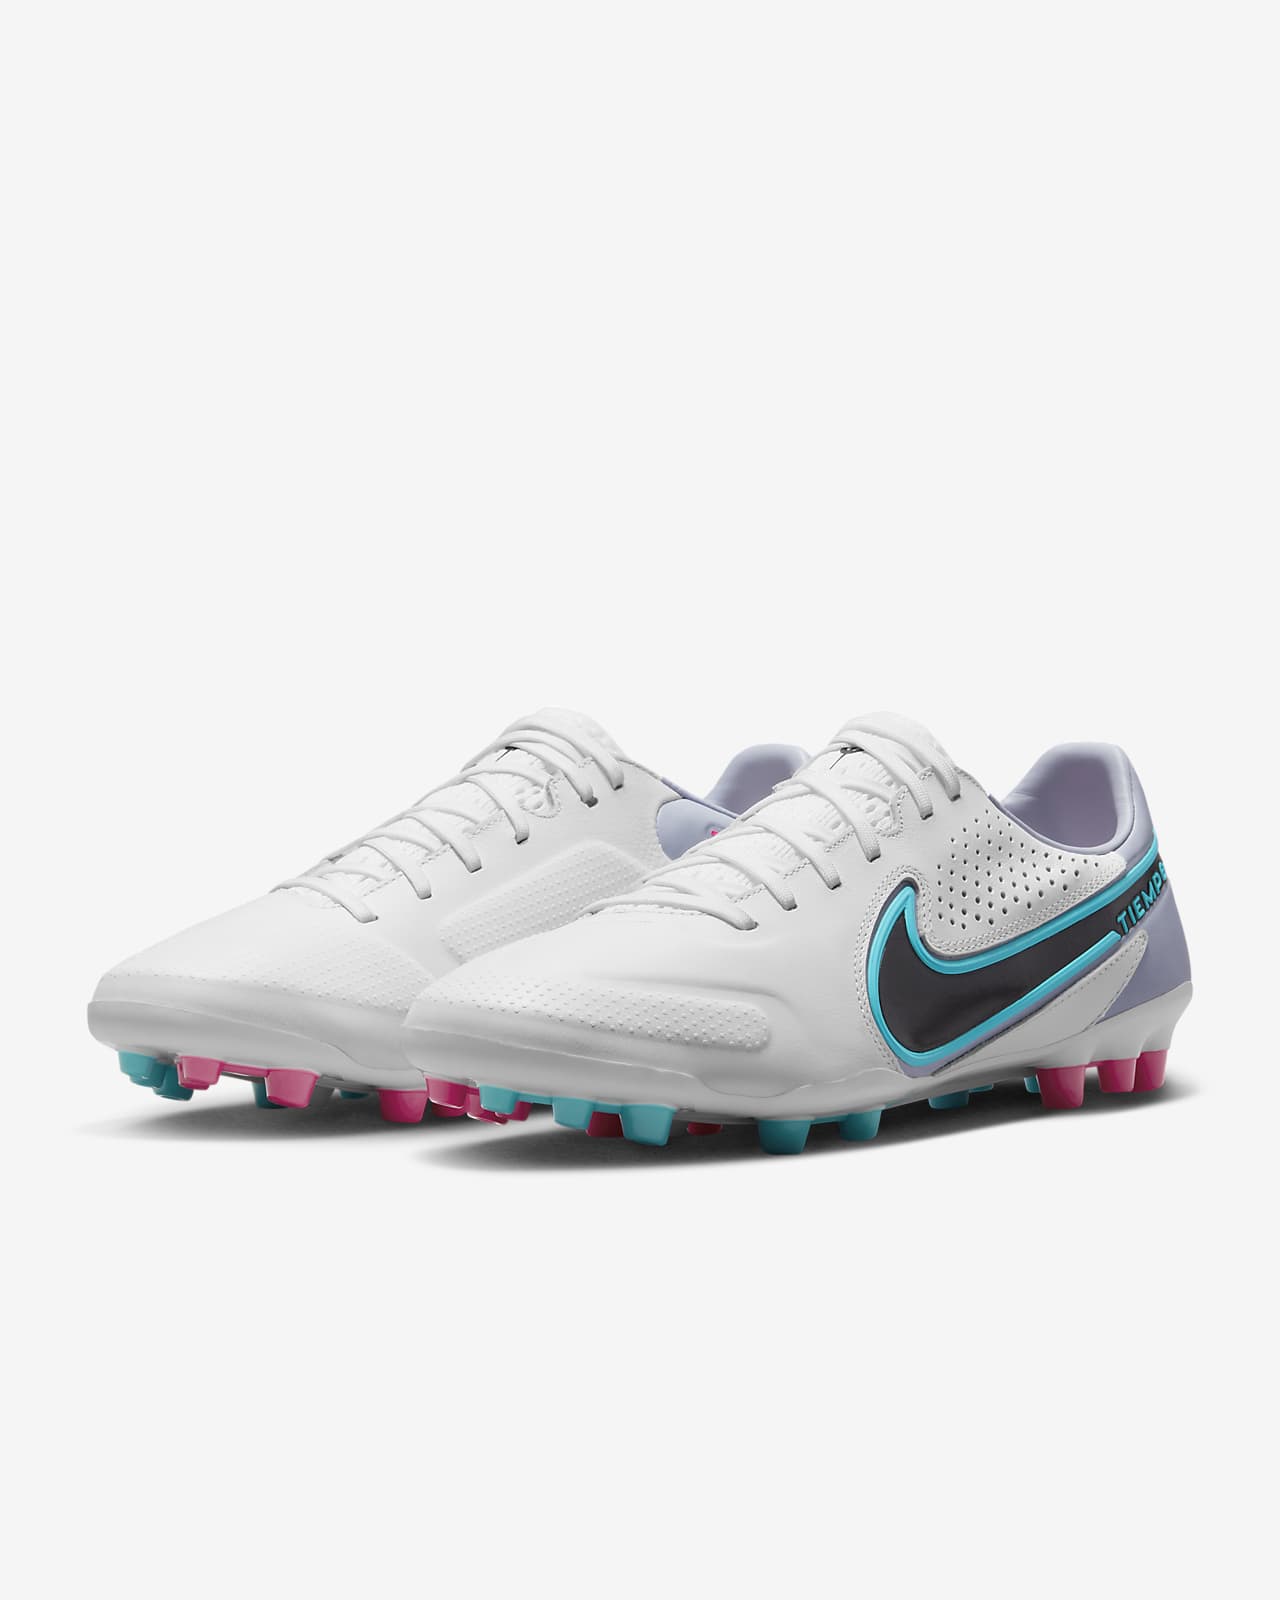 Dwell Outside cough Nike Tiempo Legend 9 Pro AG-Pro Artificial-Ground Football Boot. Nike SA